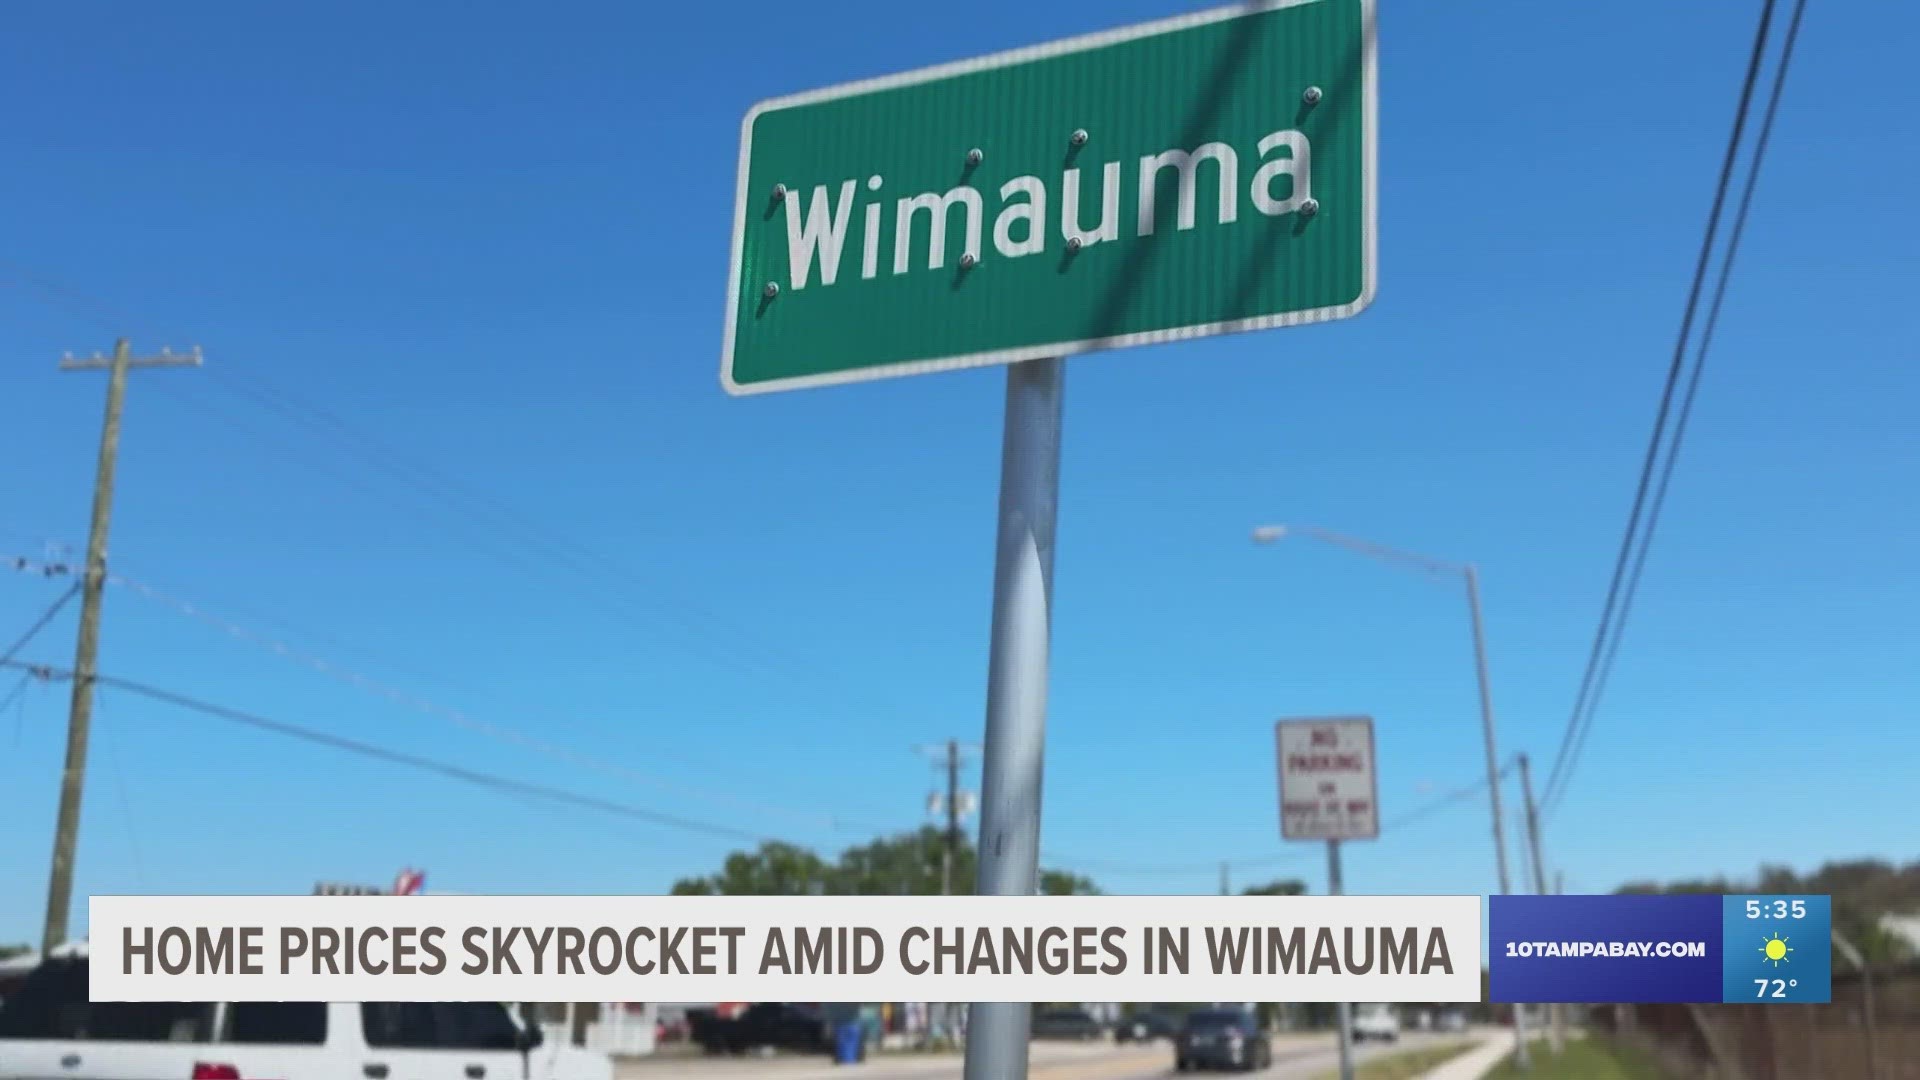 As home and rent prices continue to rise in Wimauma, those who have lived there for years are now being priced out of the place they call home.